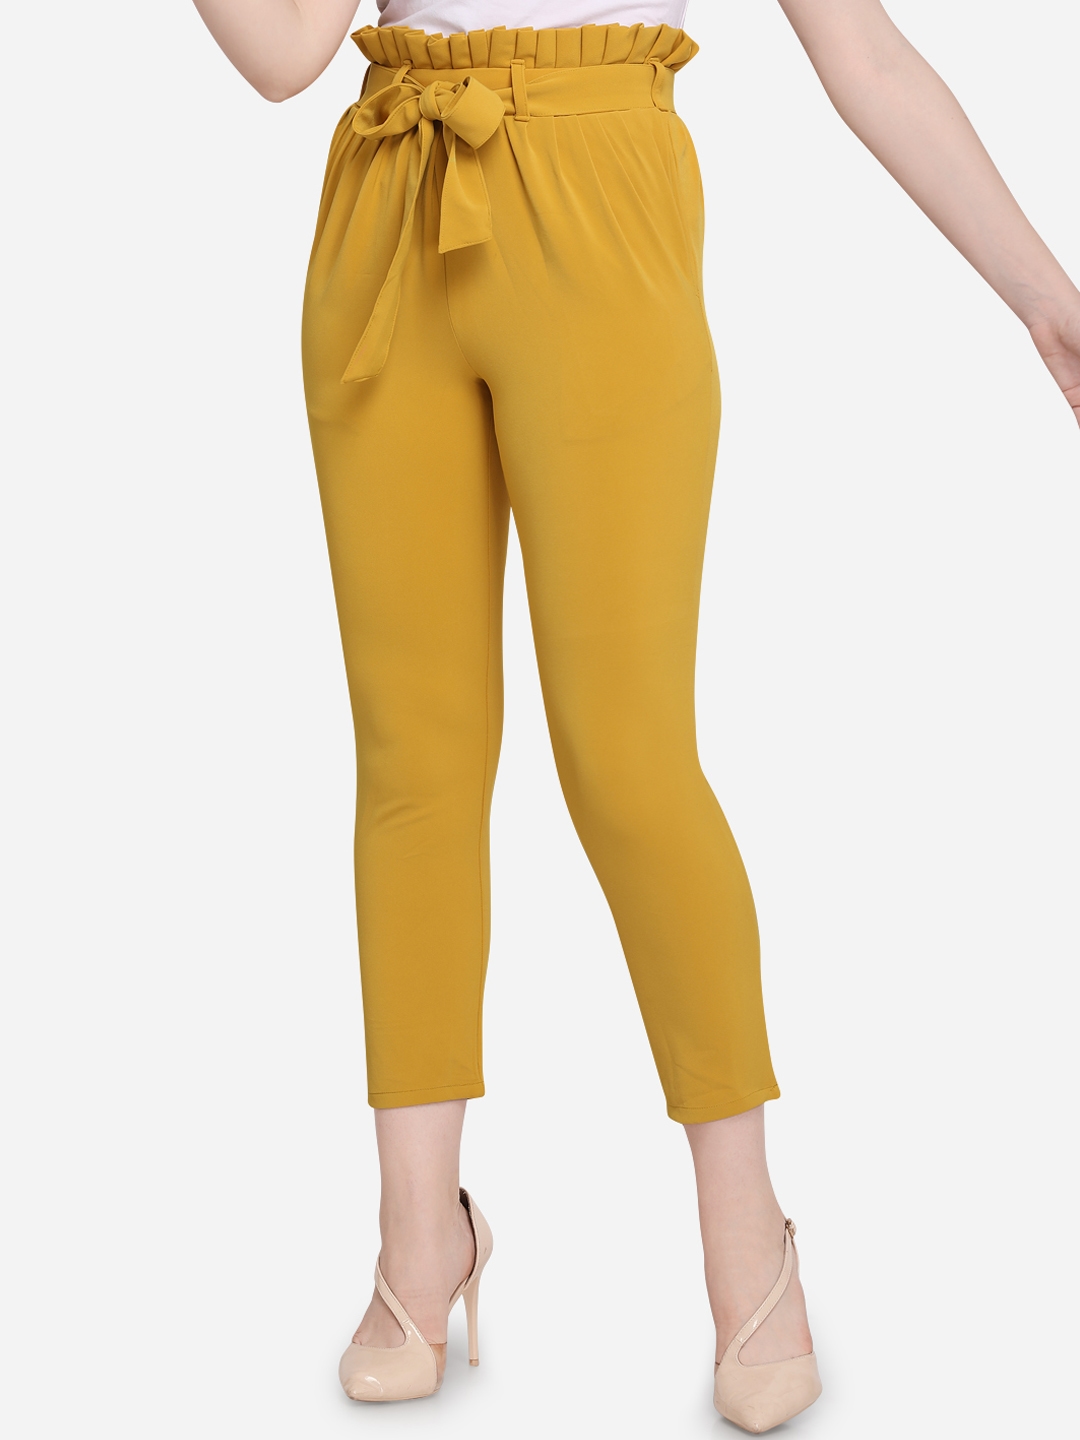 Latest Pantaloons Cigarette Trousers arrivals - Women - 1 products |  FASHIOLA.in